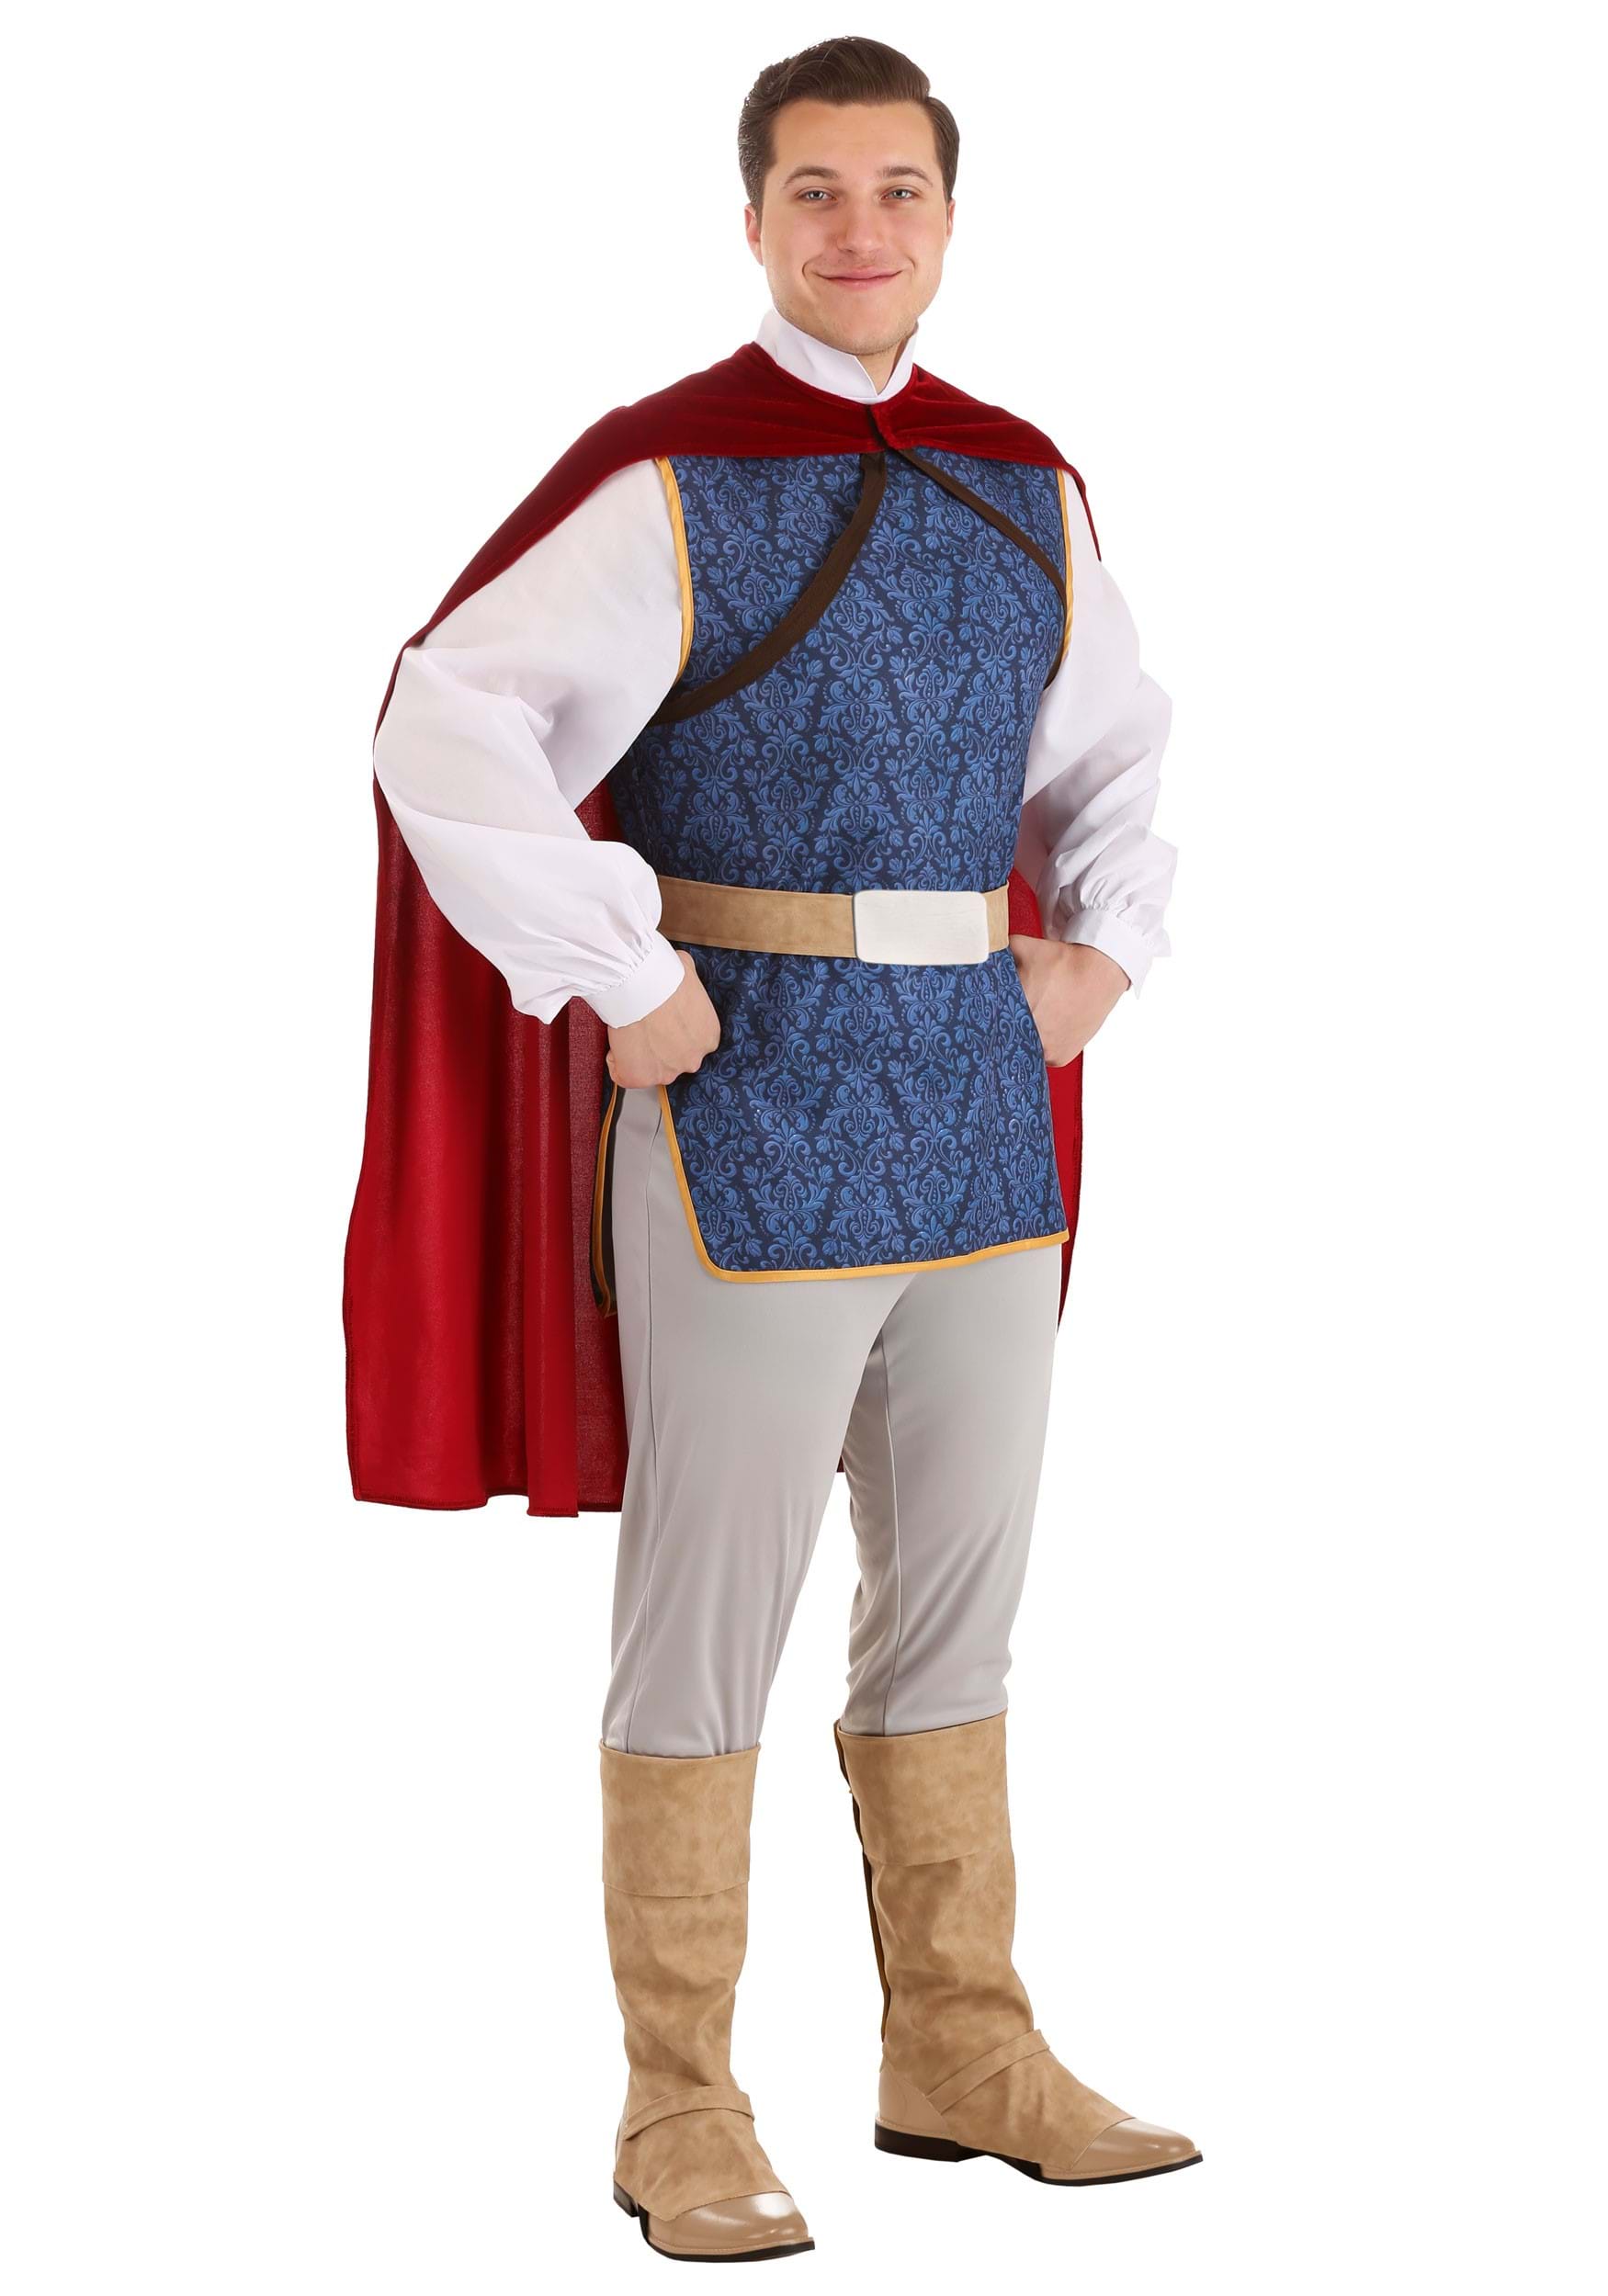 Photos - Fancy Dress Prince FUN Costumes Snow White Adult  Costume Brown/Blue/Red FUN190 